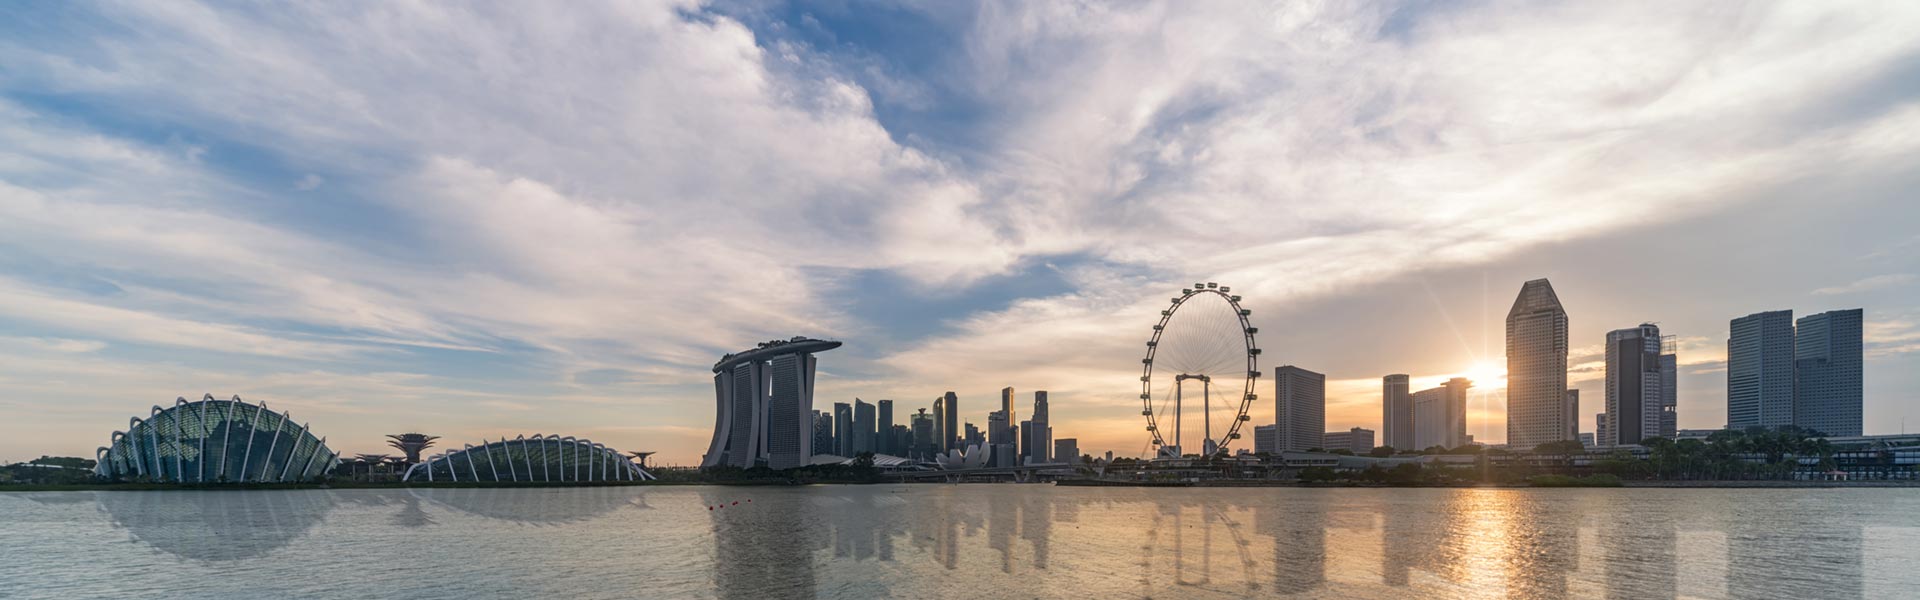 SAP.iO Foundry Singapore Launches Industry 4.0 Startup Acceleration Program